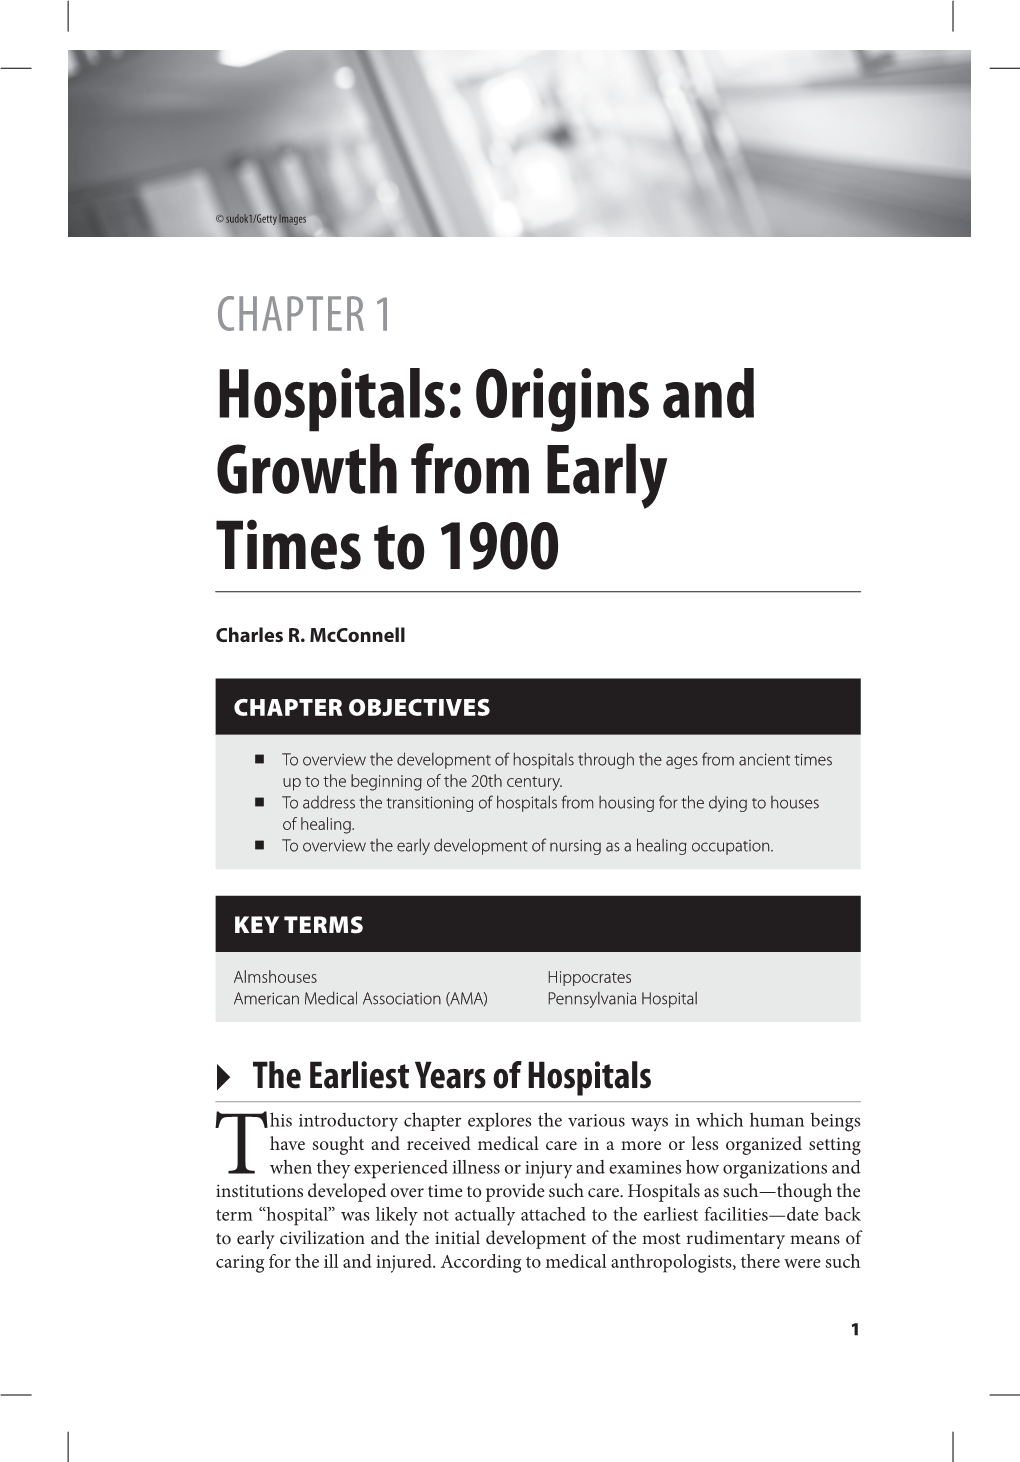 Hospitals: Origins and Growth from Early Times to 1900